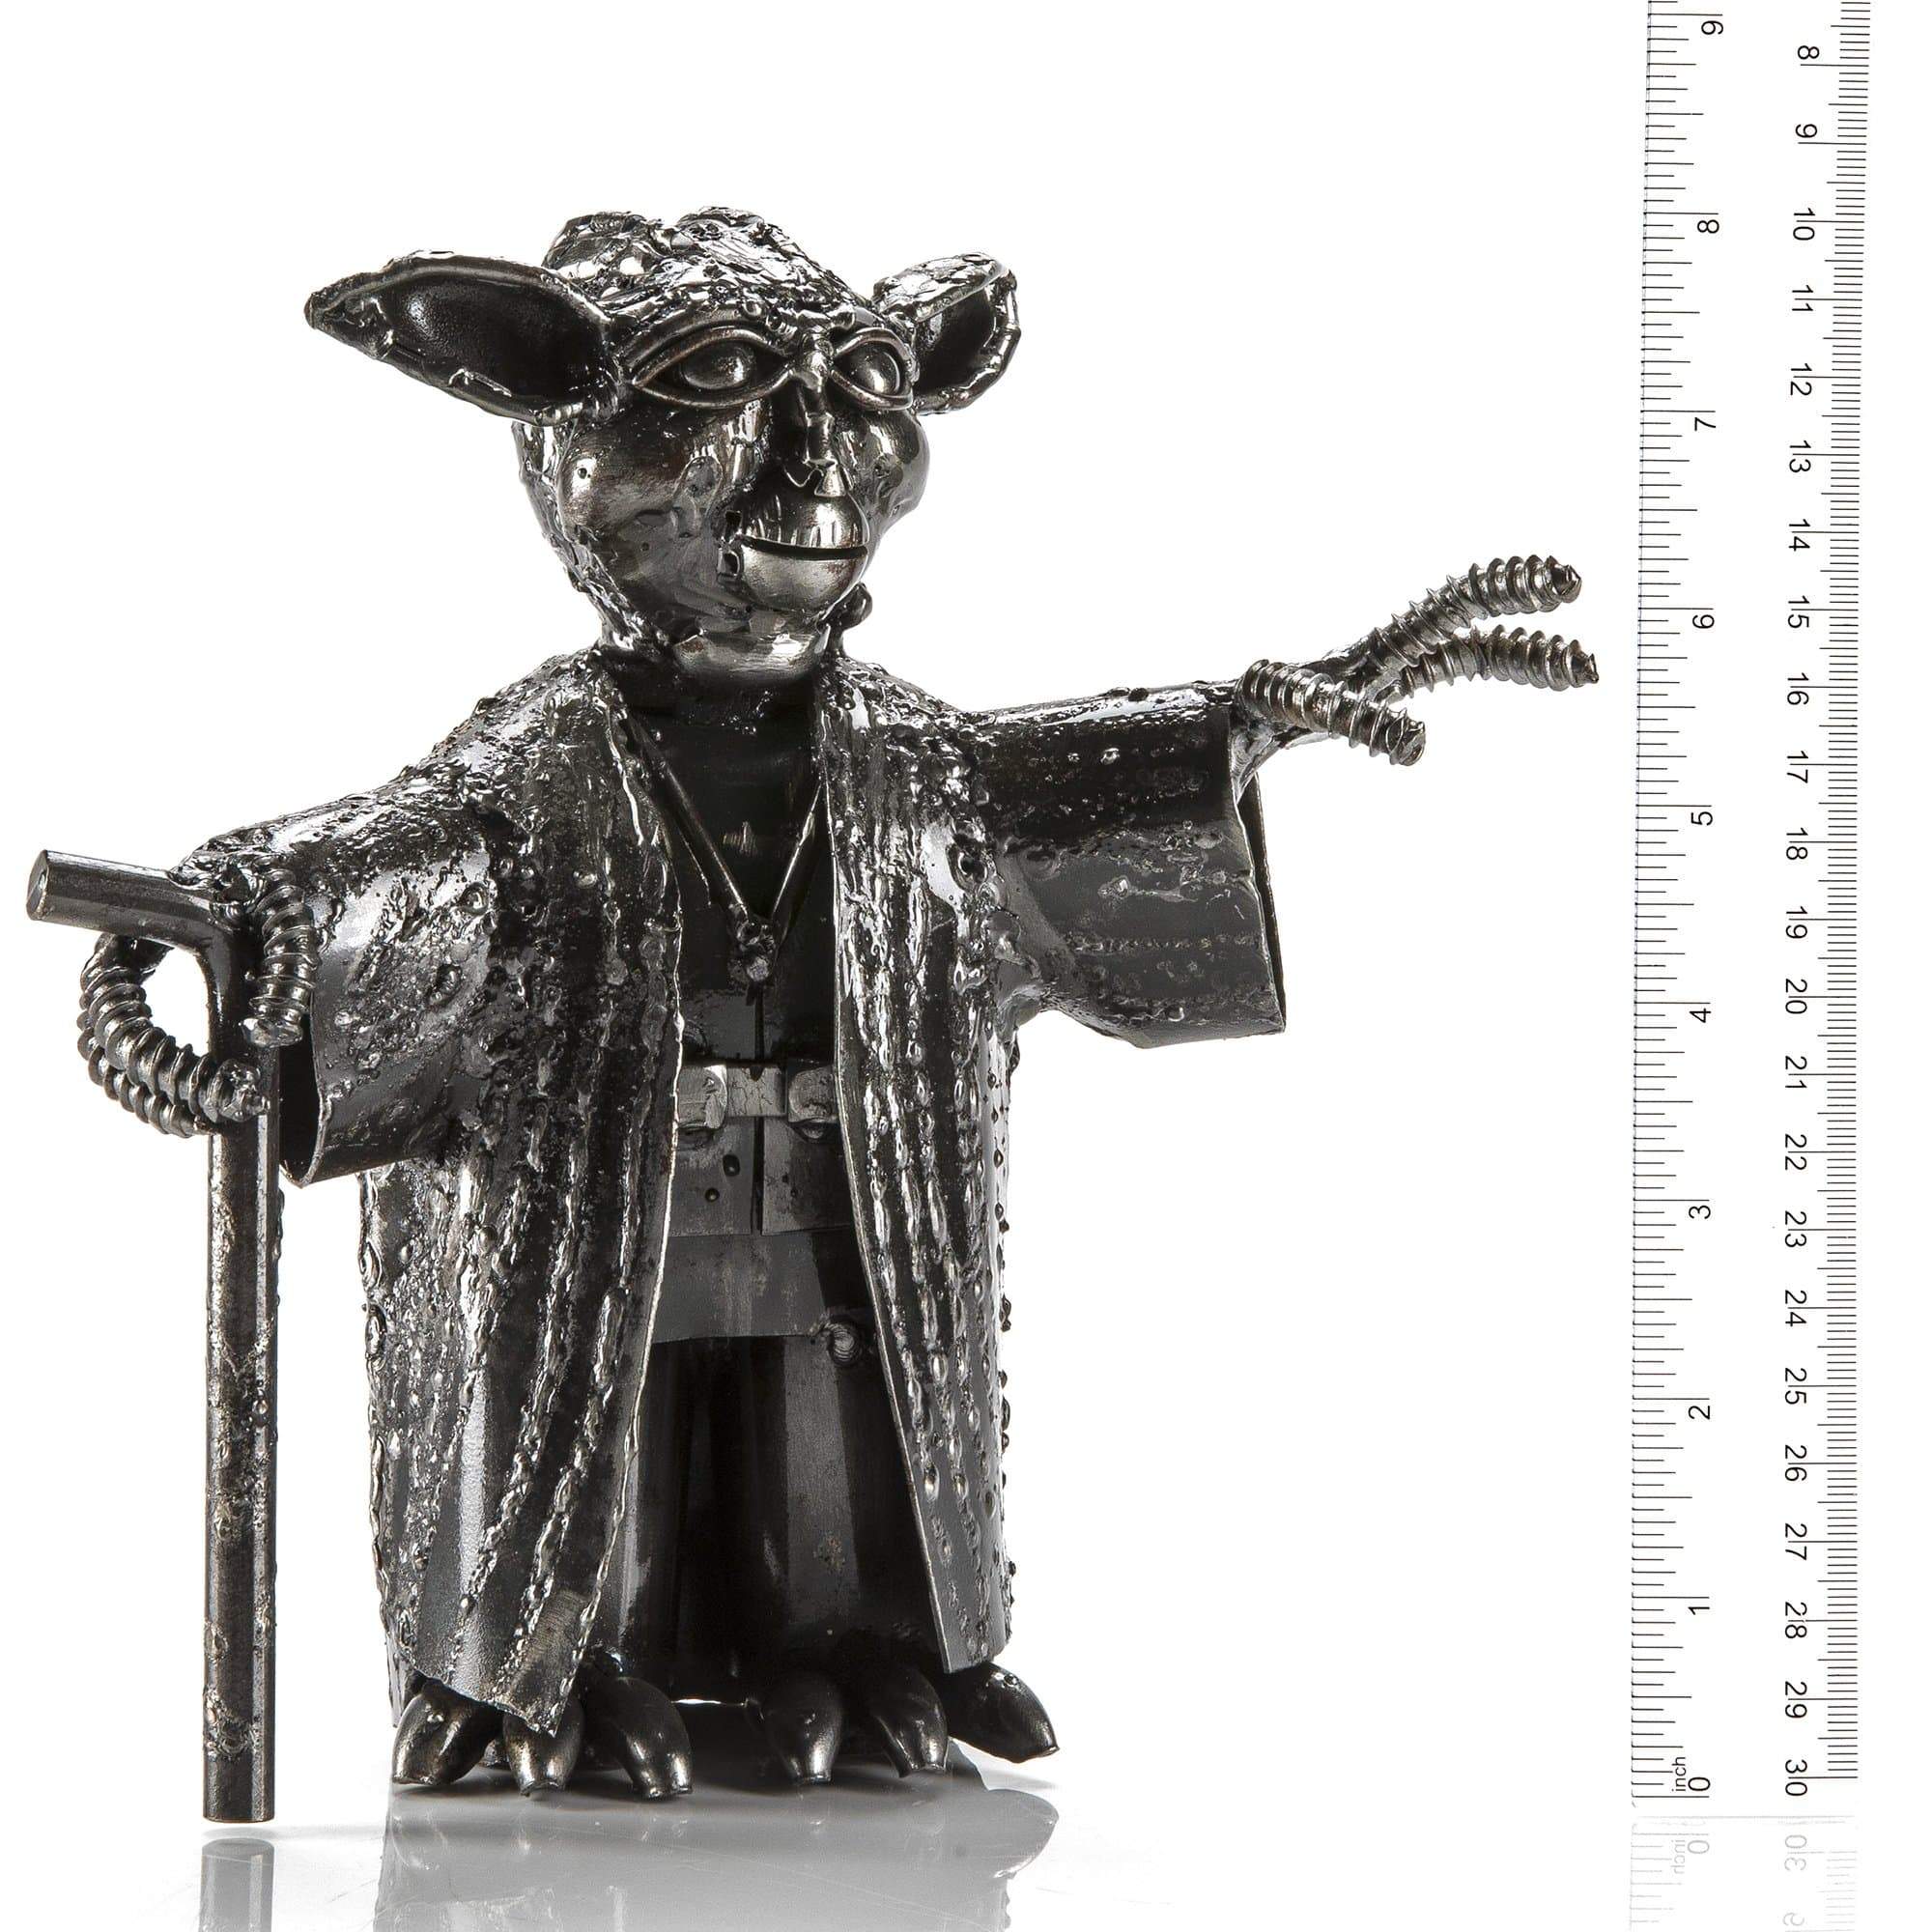 Kalifano Recycled Metal Art Yoda Inspired Recycled Metal Sculpture RMS-600Y-N